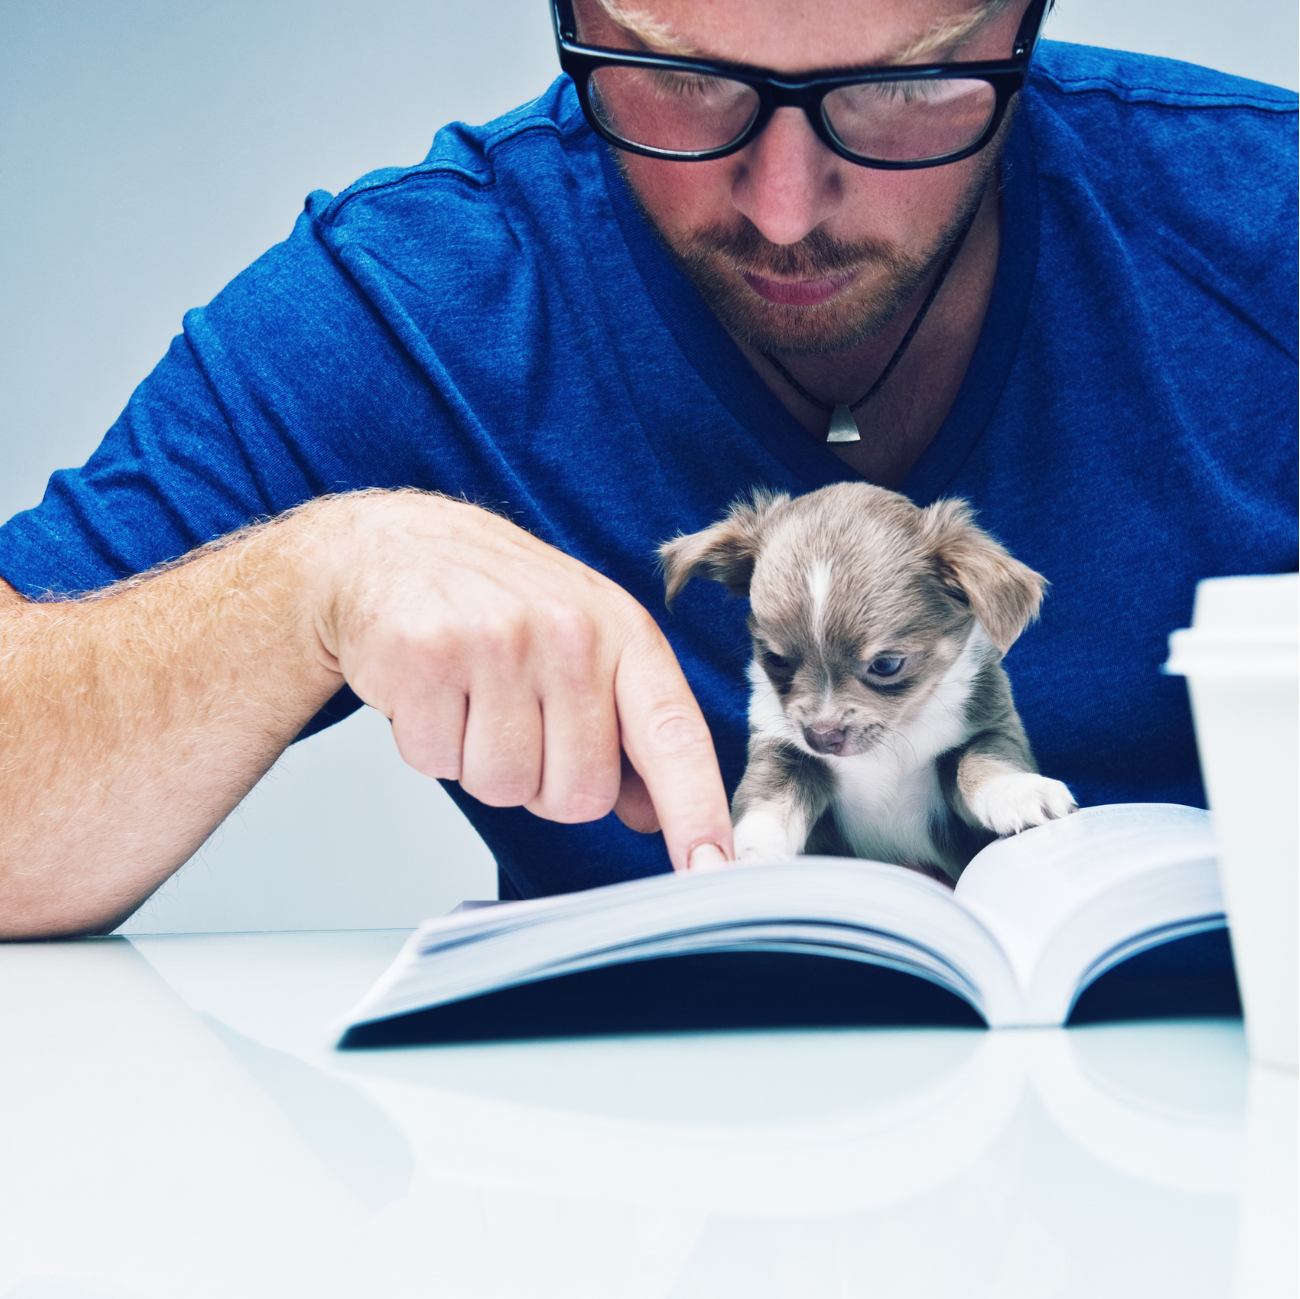 At Home Puppy Training: Best Tricks and Ways to DIY